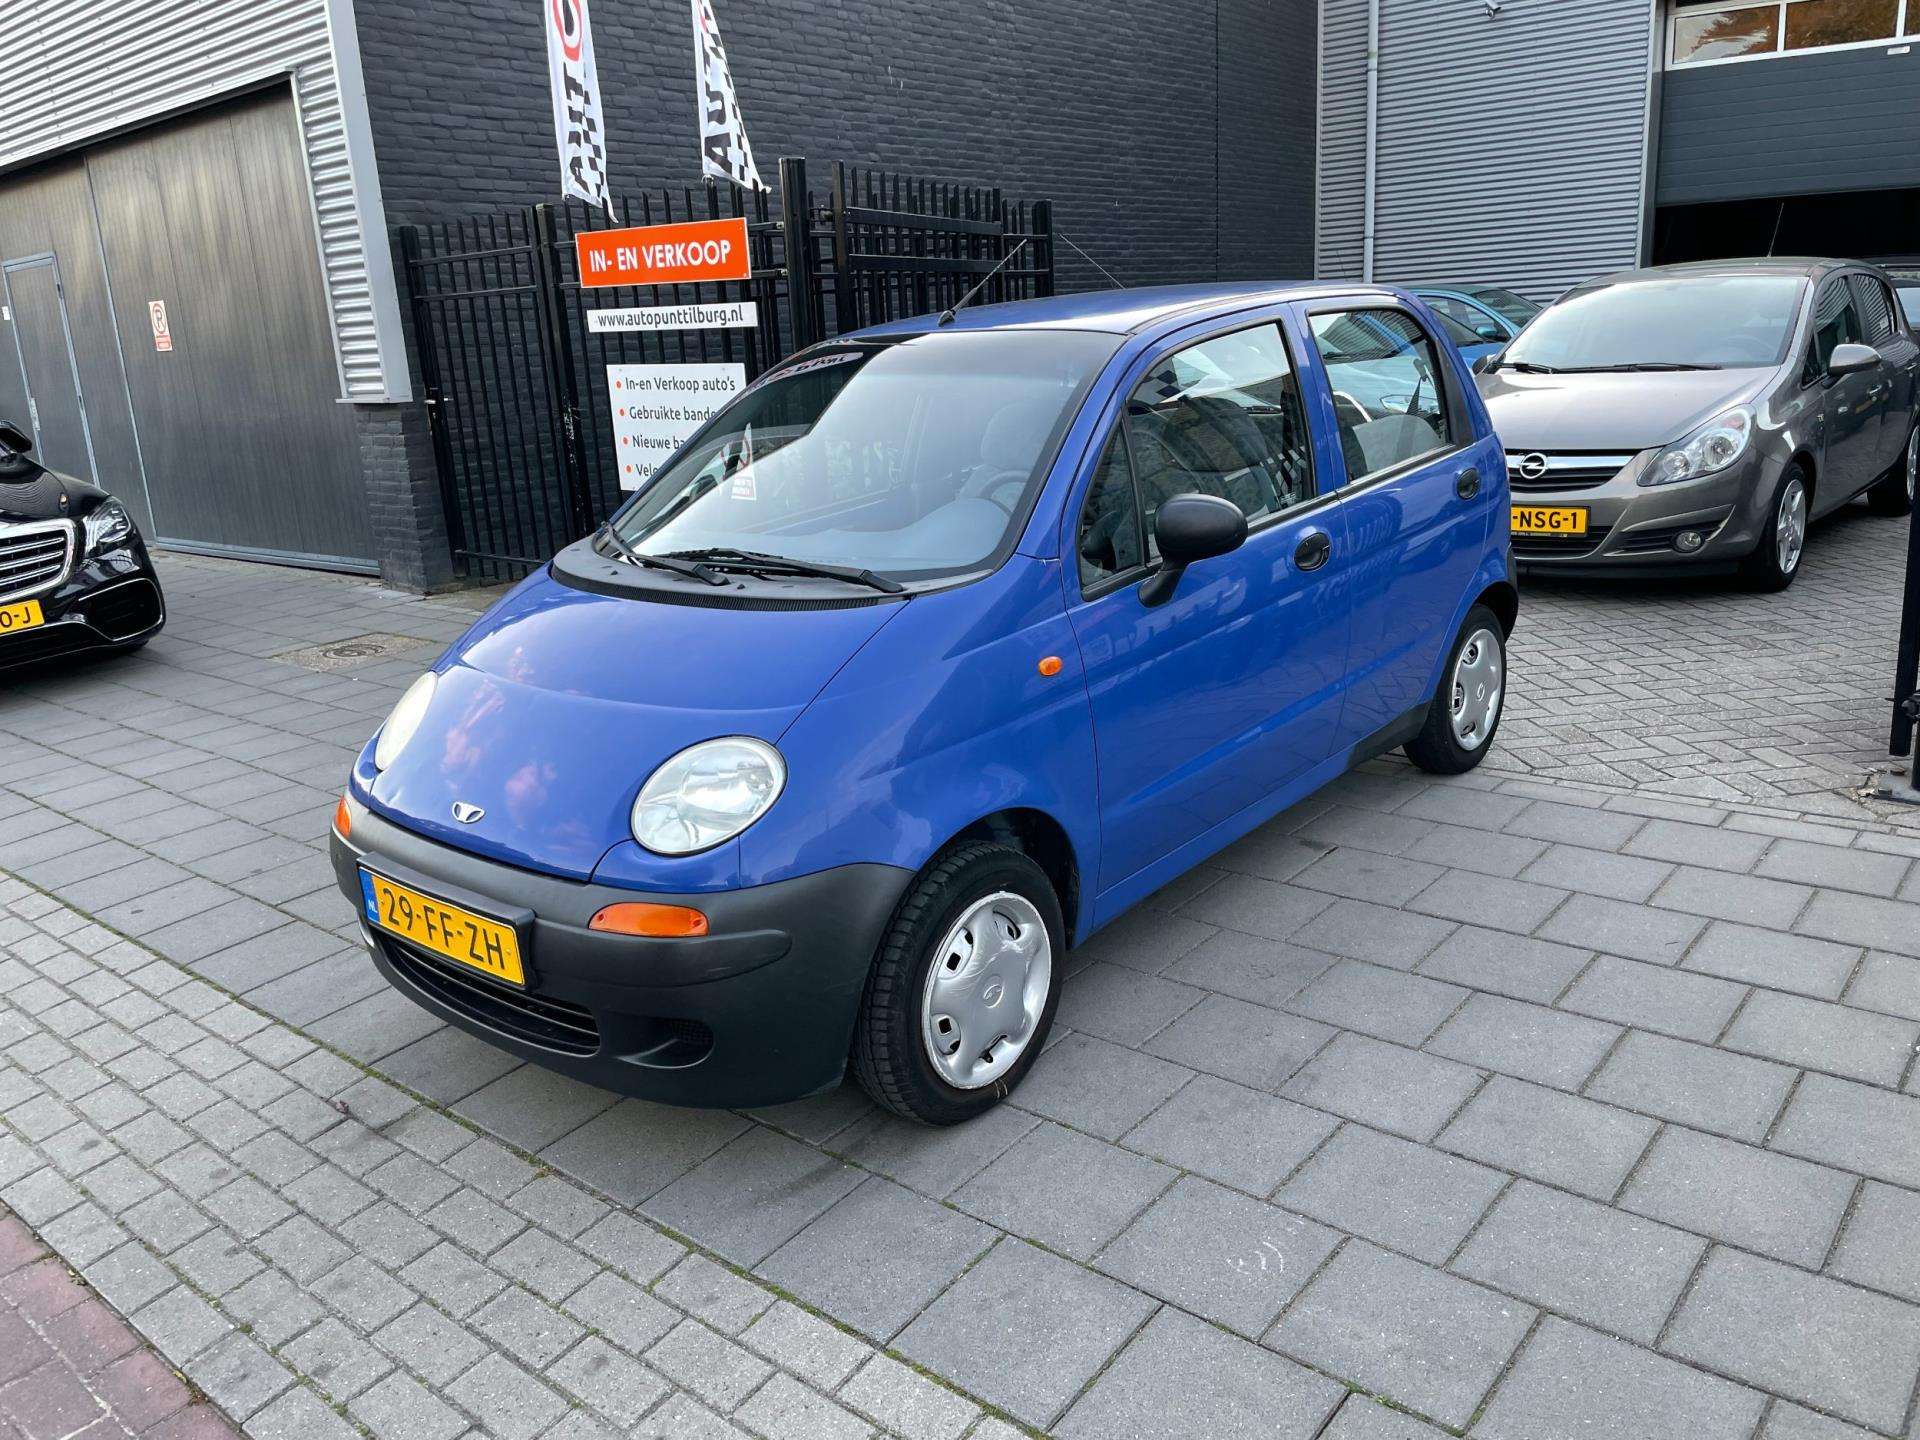 Daewoo Matiz Compact in Blue used in TILBURG for € 999.-